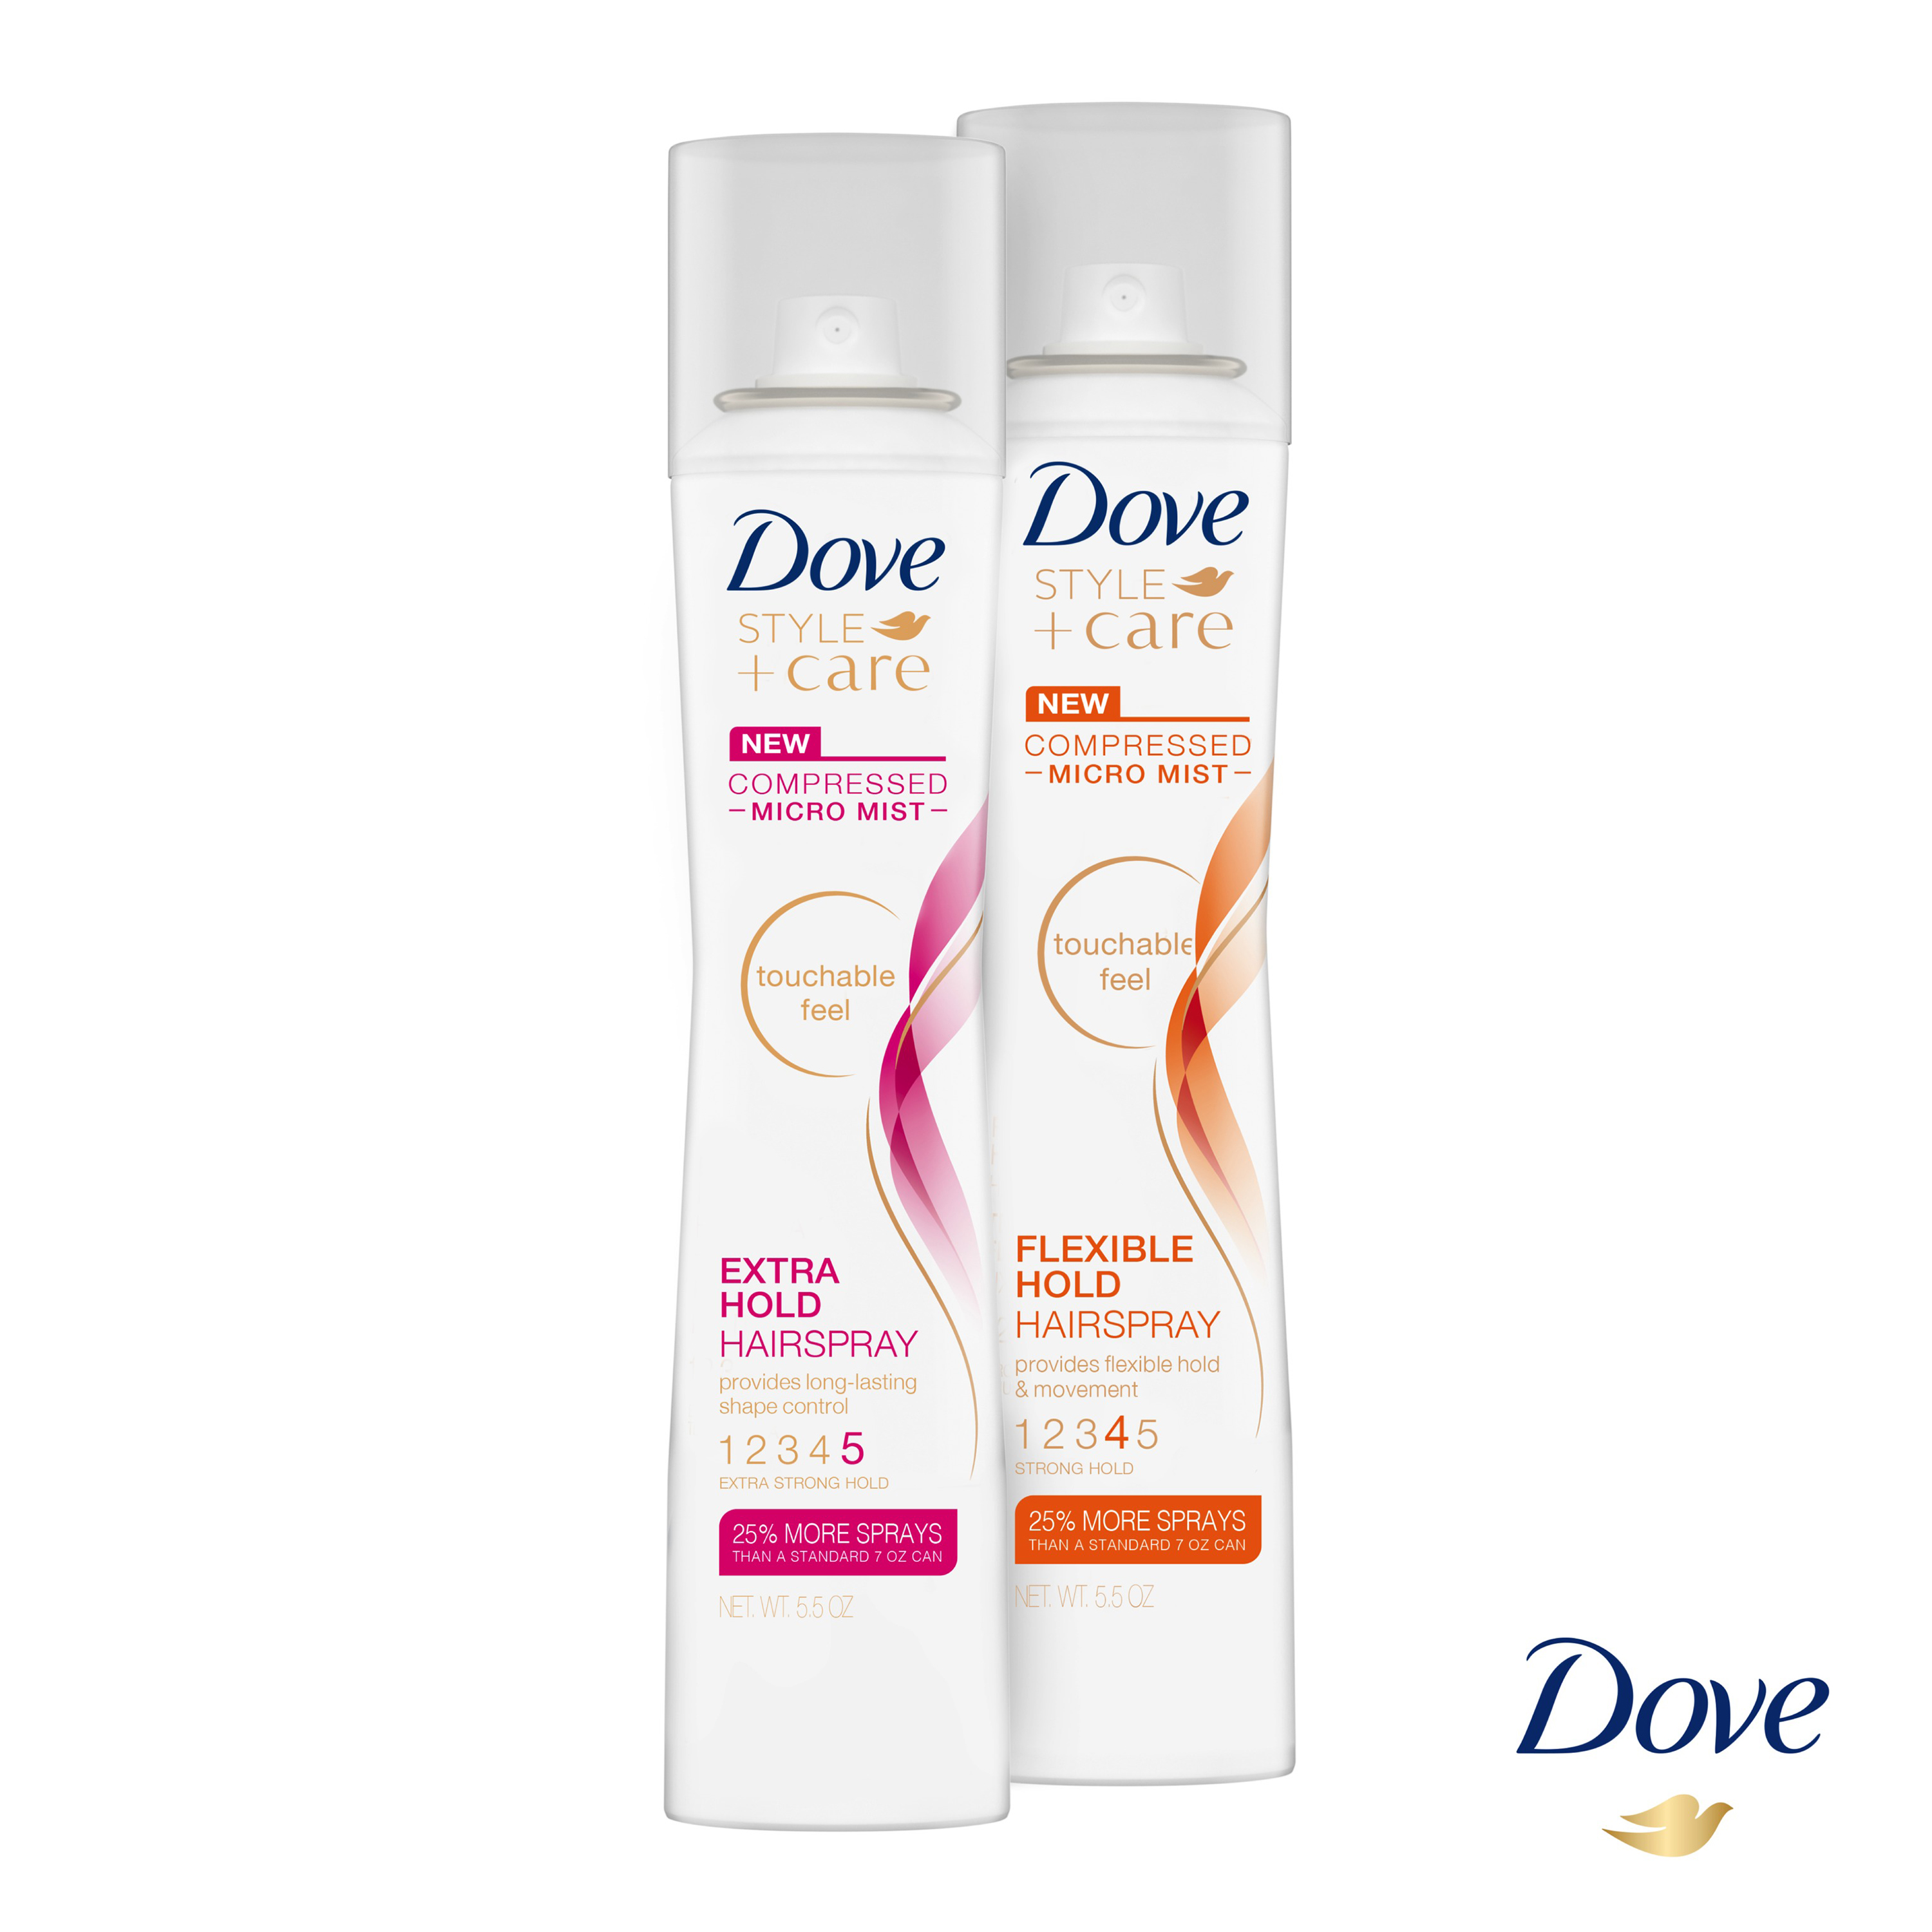 Dove Style + Care Extra Hold Hairspray, 5.5 oz - image 5 of 5